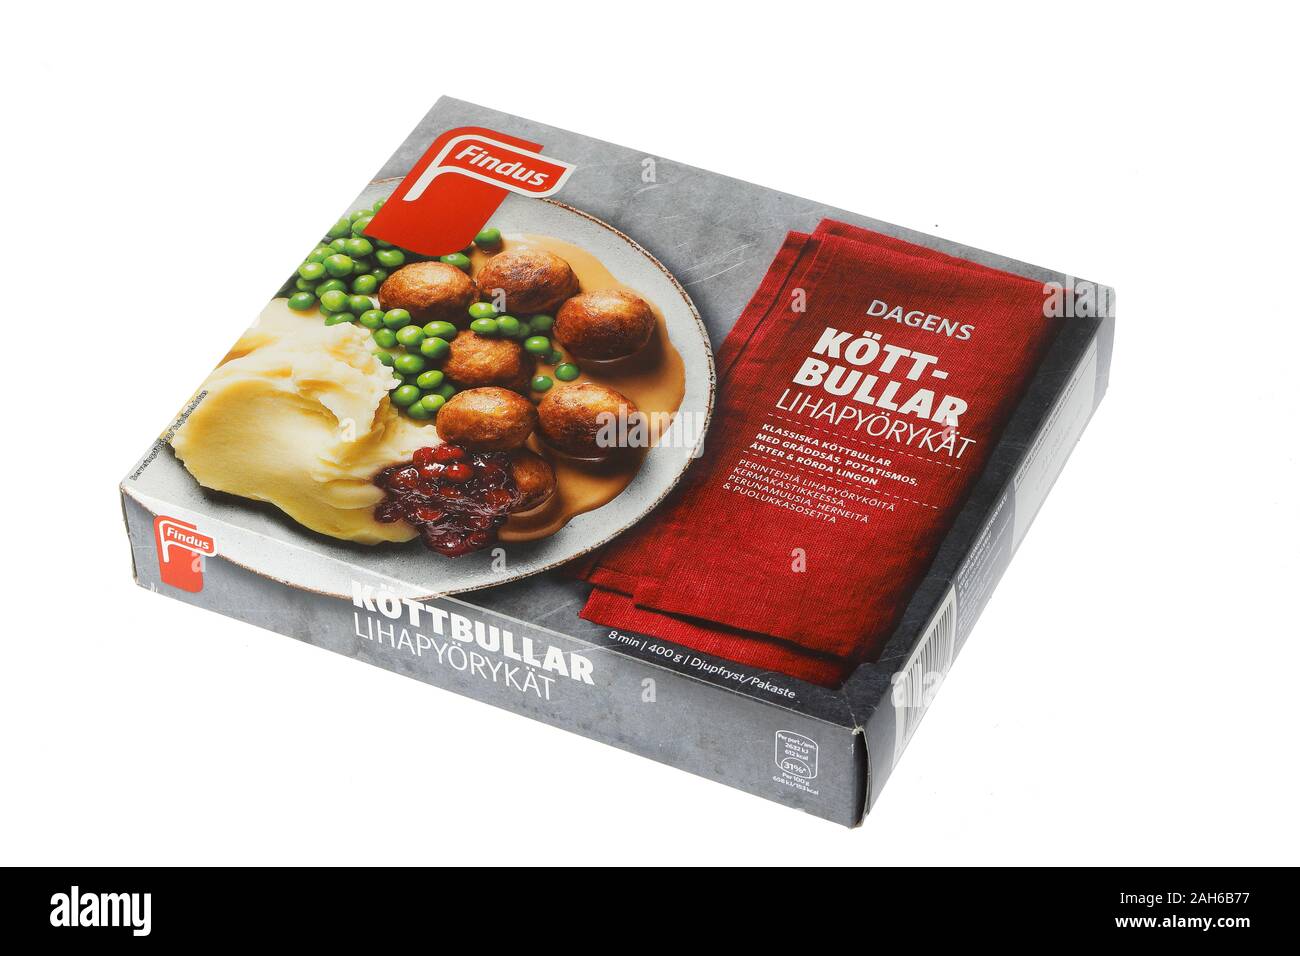 Stockholm, Sweden - December 12, 2019: One Swedish market package of Findus meatballs frozen ready meal for microwave isolated on white background. Stock Photo